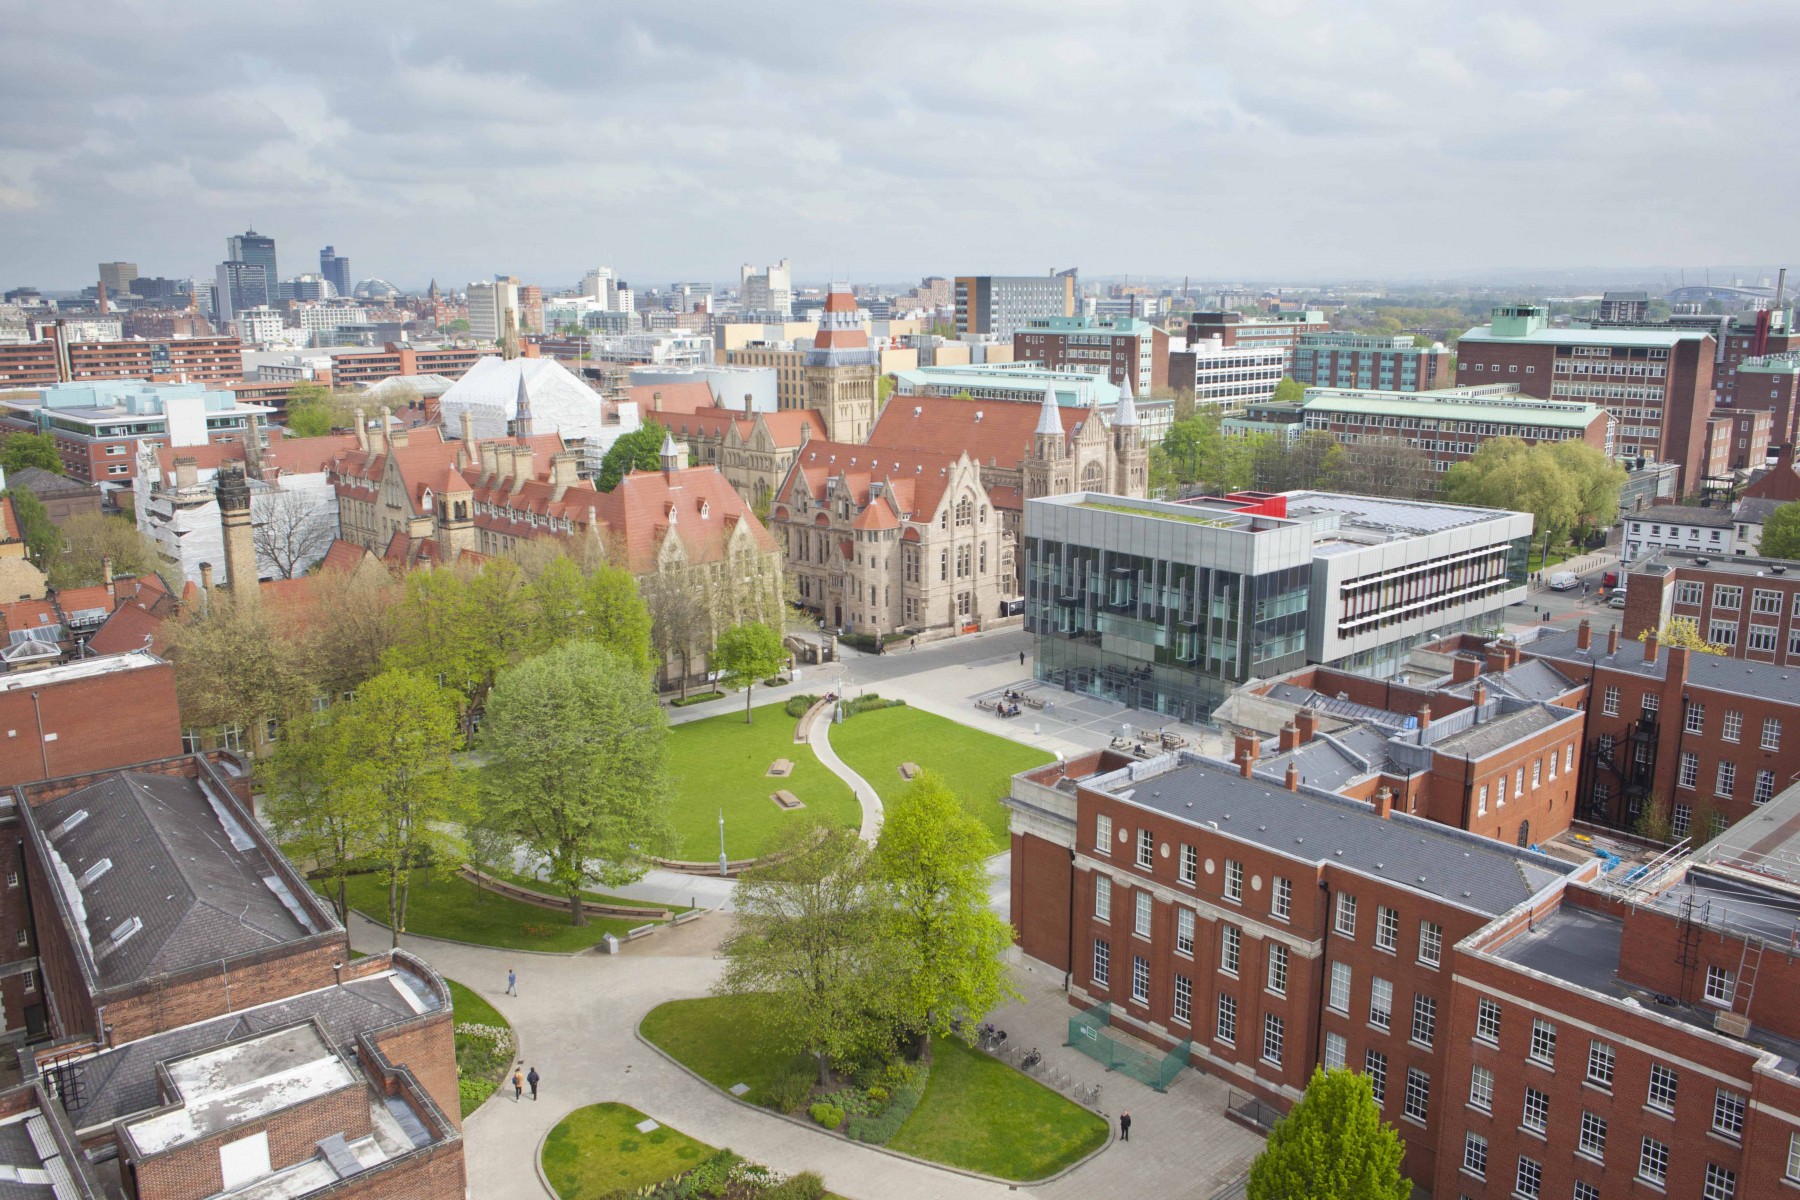 An aerial view of the university of manchester